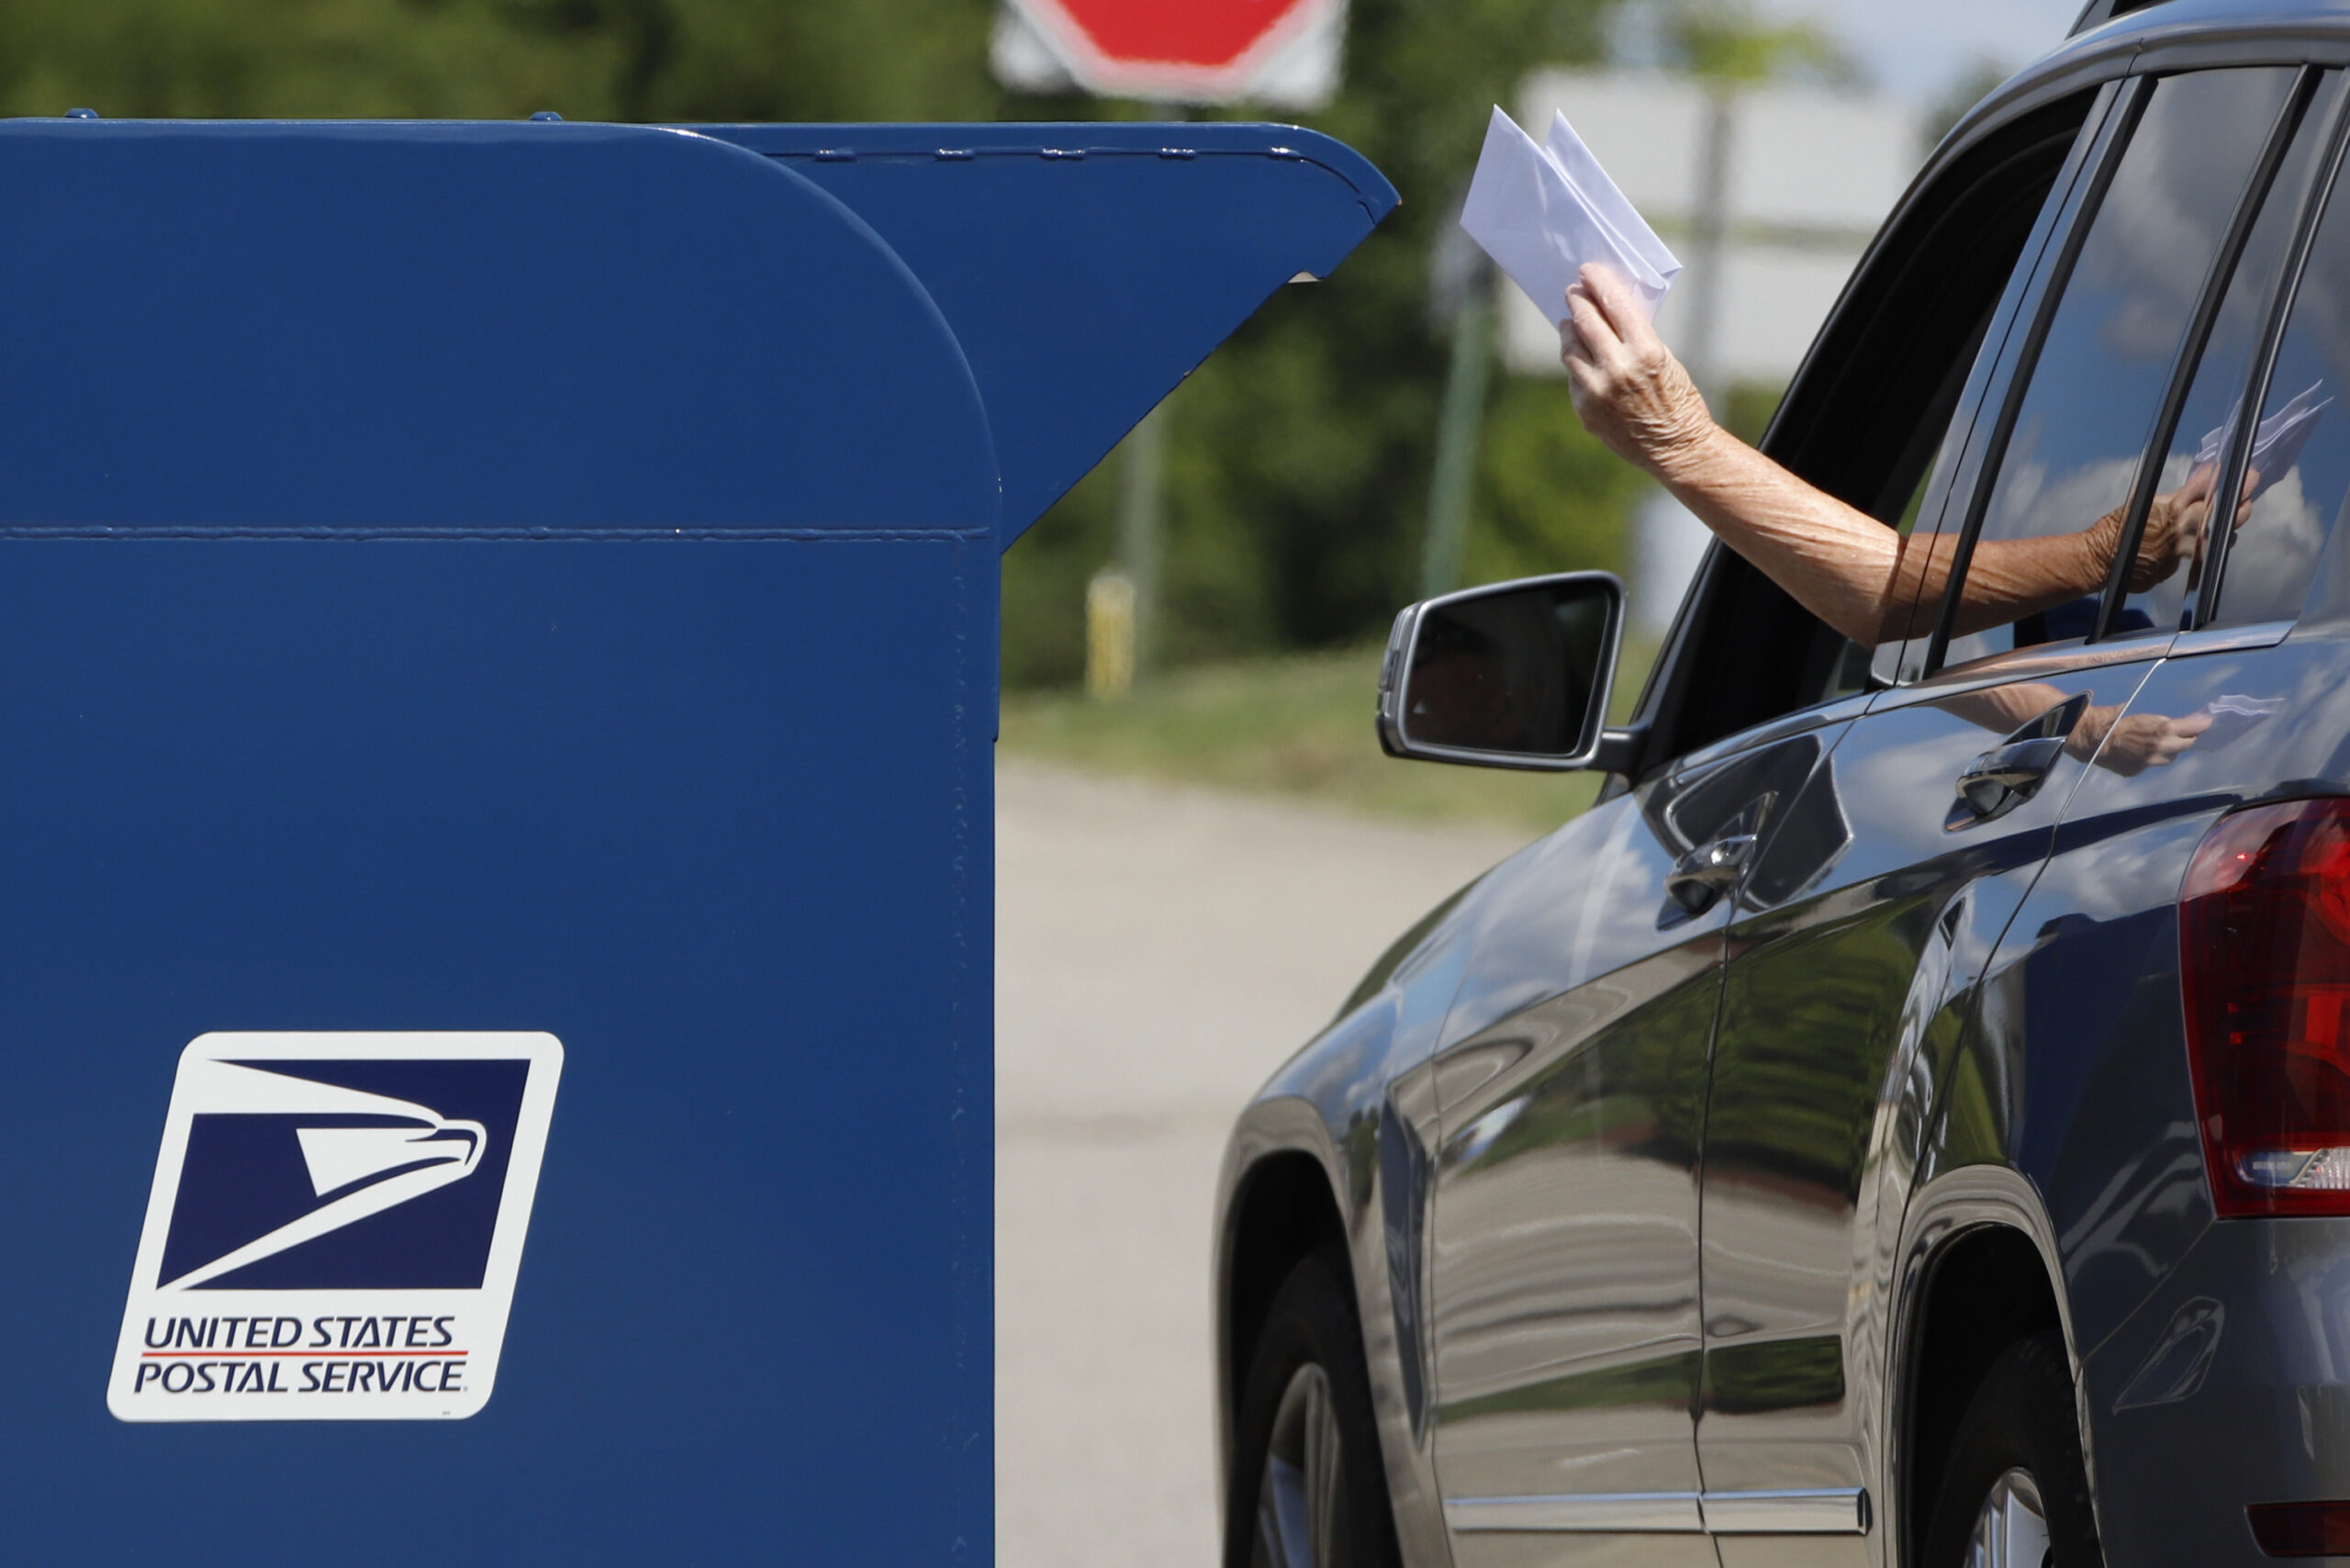 A person deposits mail in a USPS box